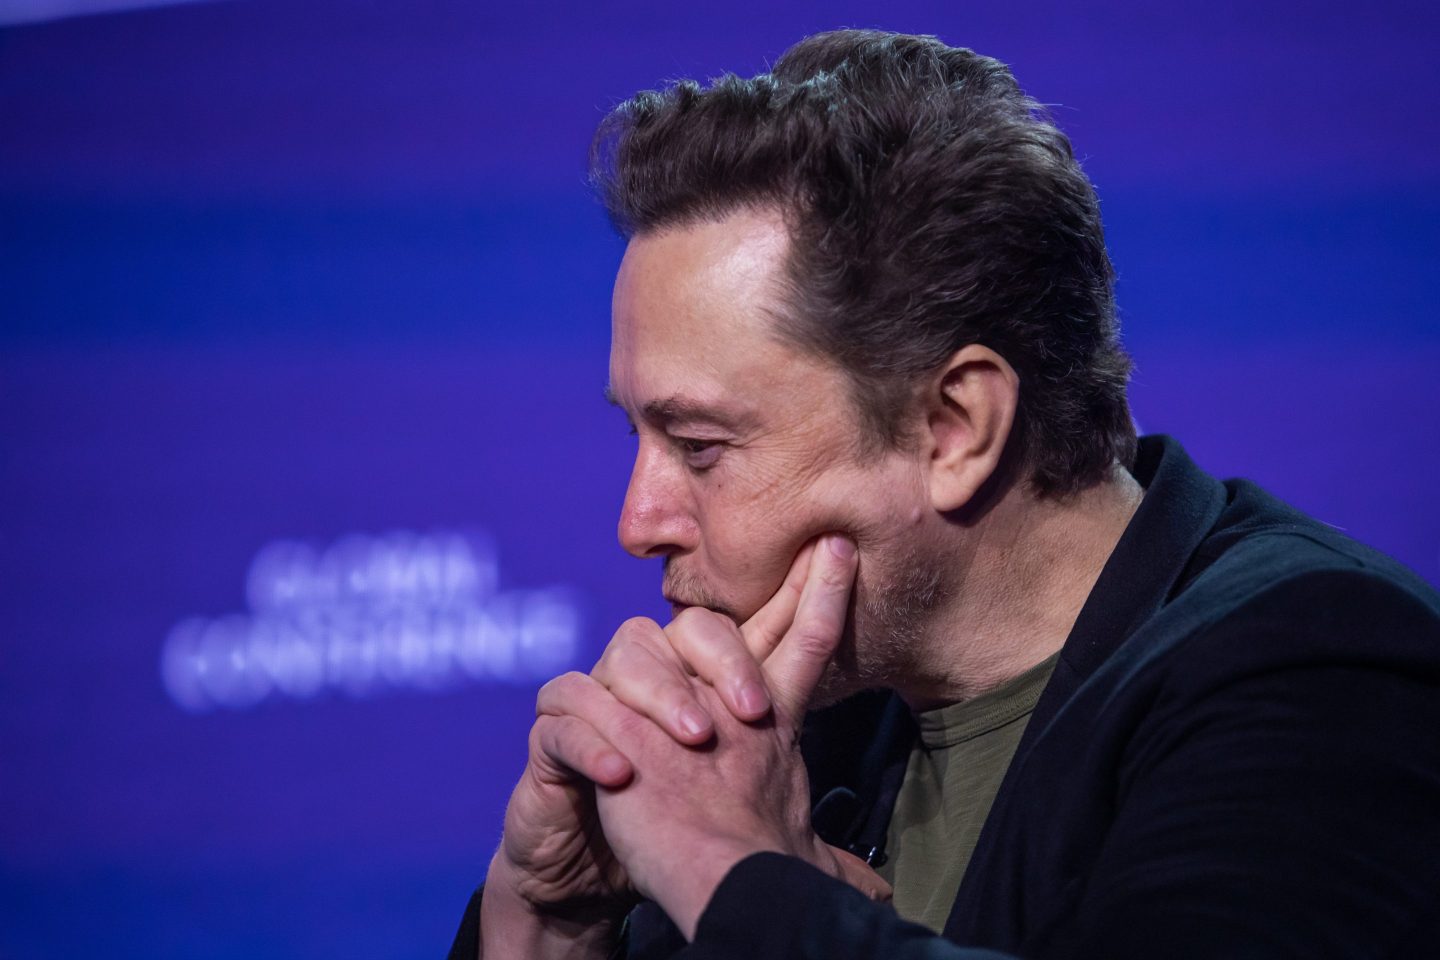 Elon Musk looks dejectedly to the side as he rests his head on his pointer fingers.